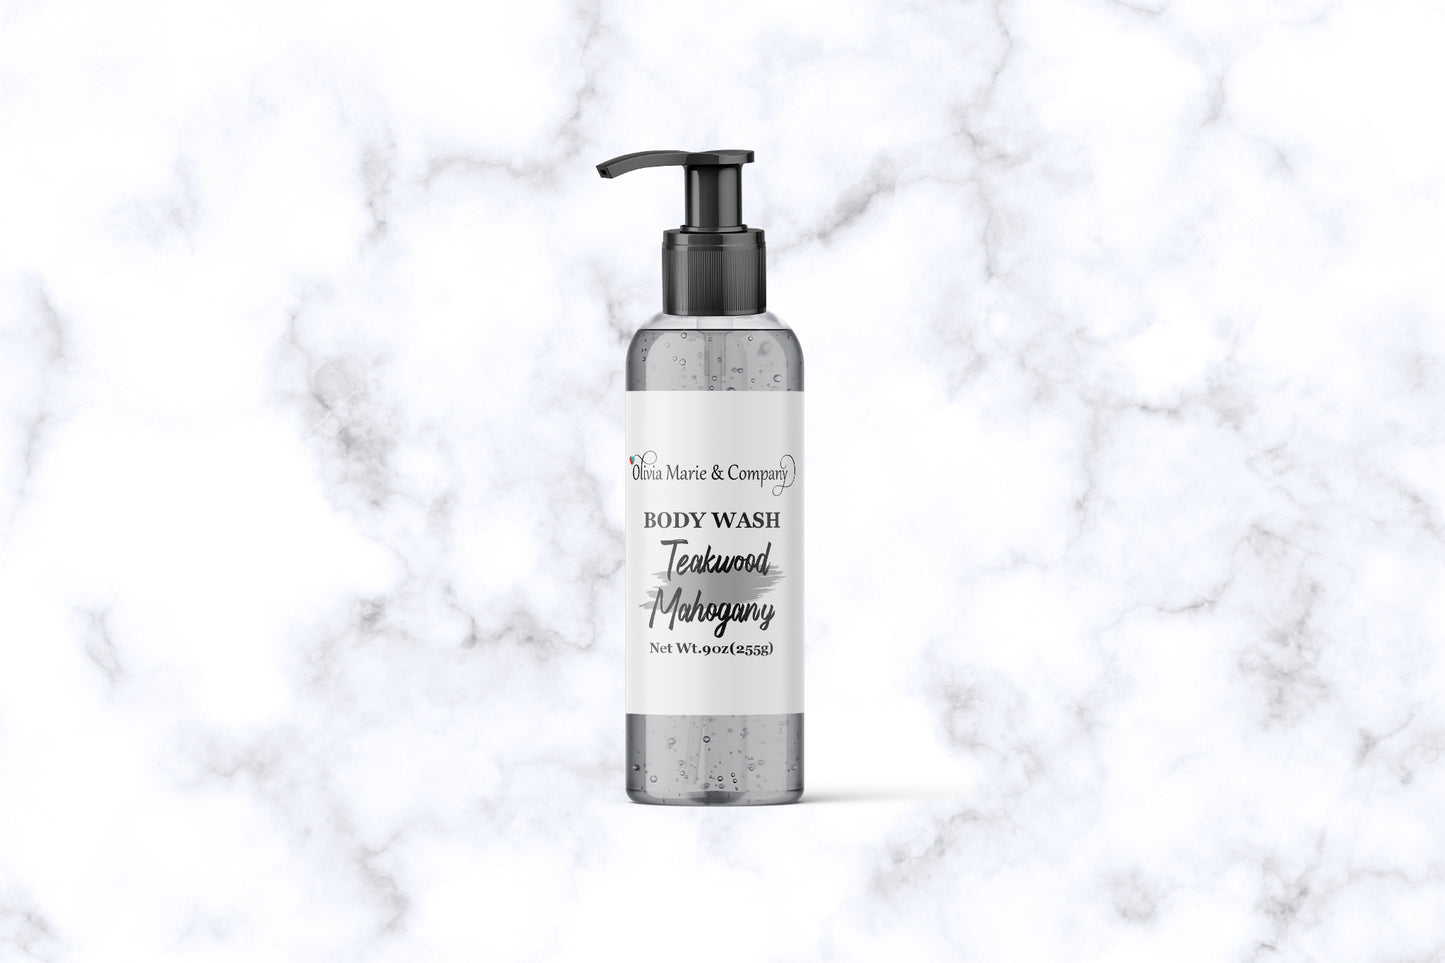 Mahogany teakwood body wash in a clear bottle with a gray liquid.